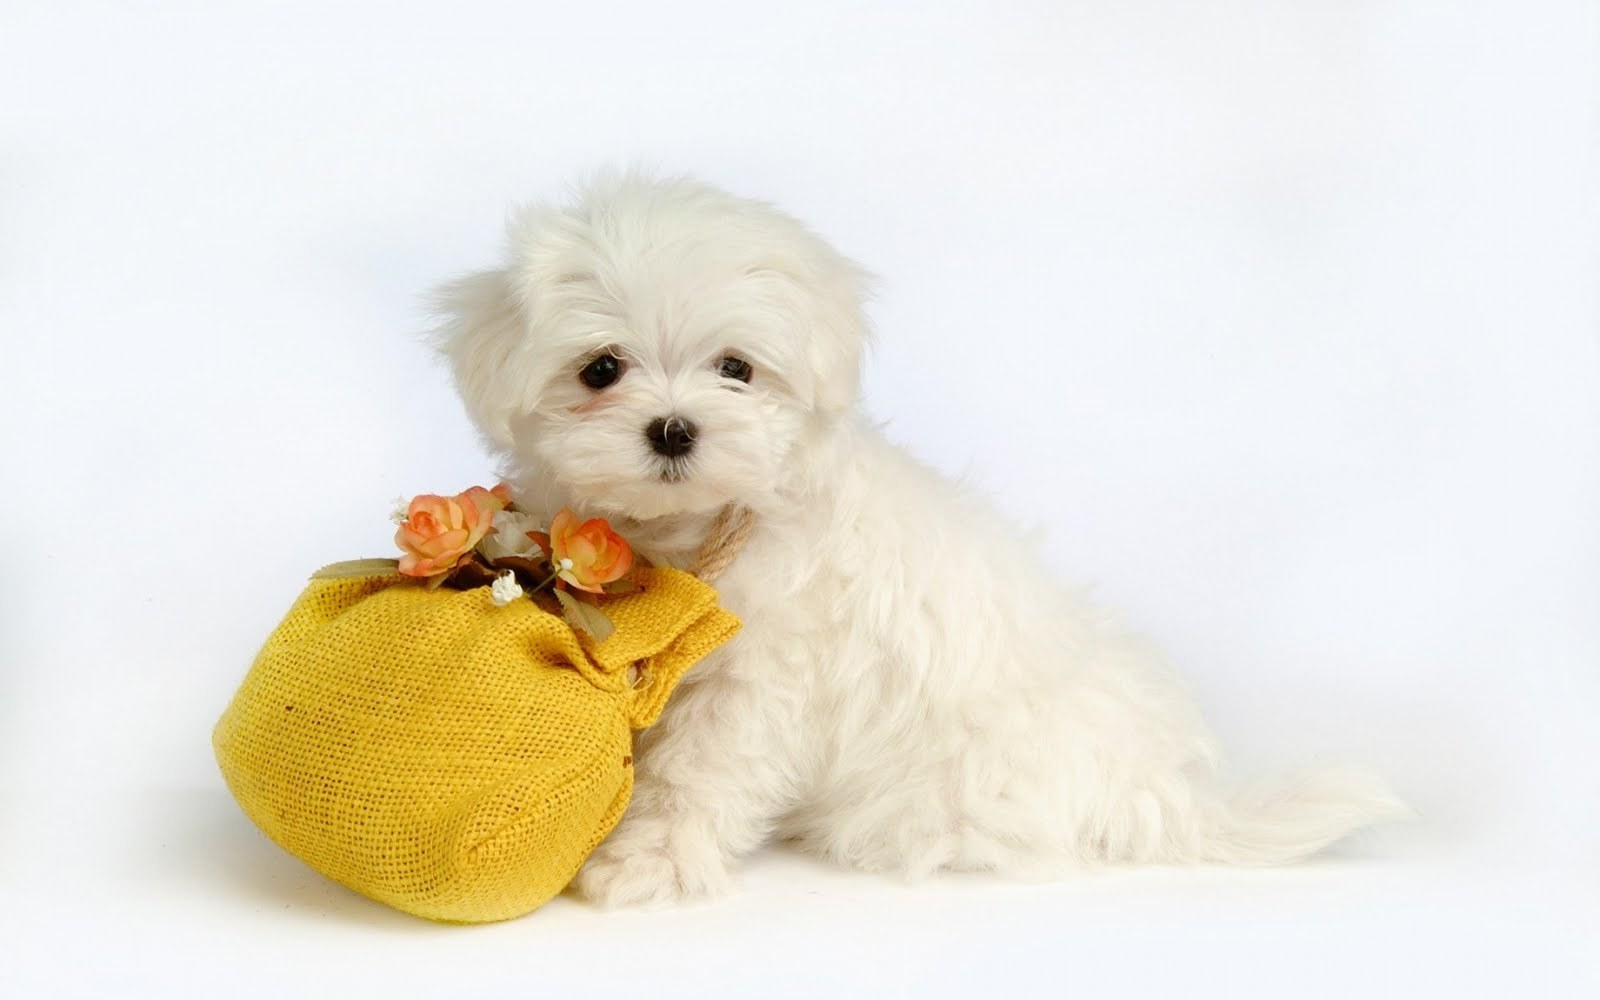 Puppies images Cute Puppy wallpaper photos 15813371 1600x1000